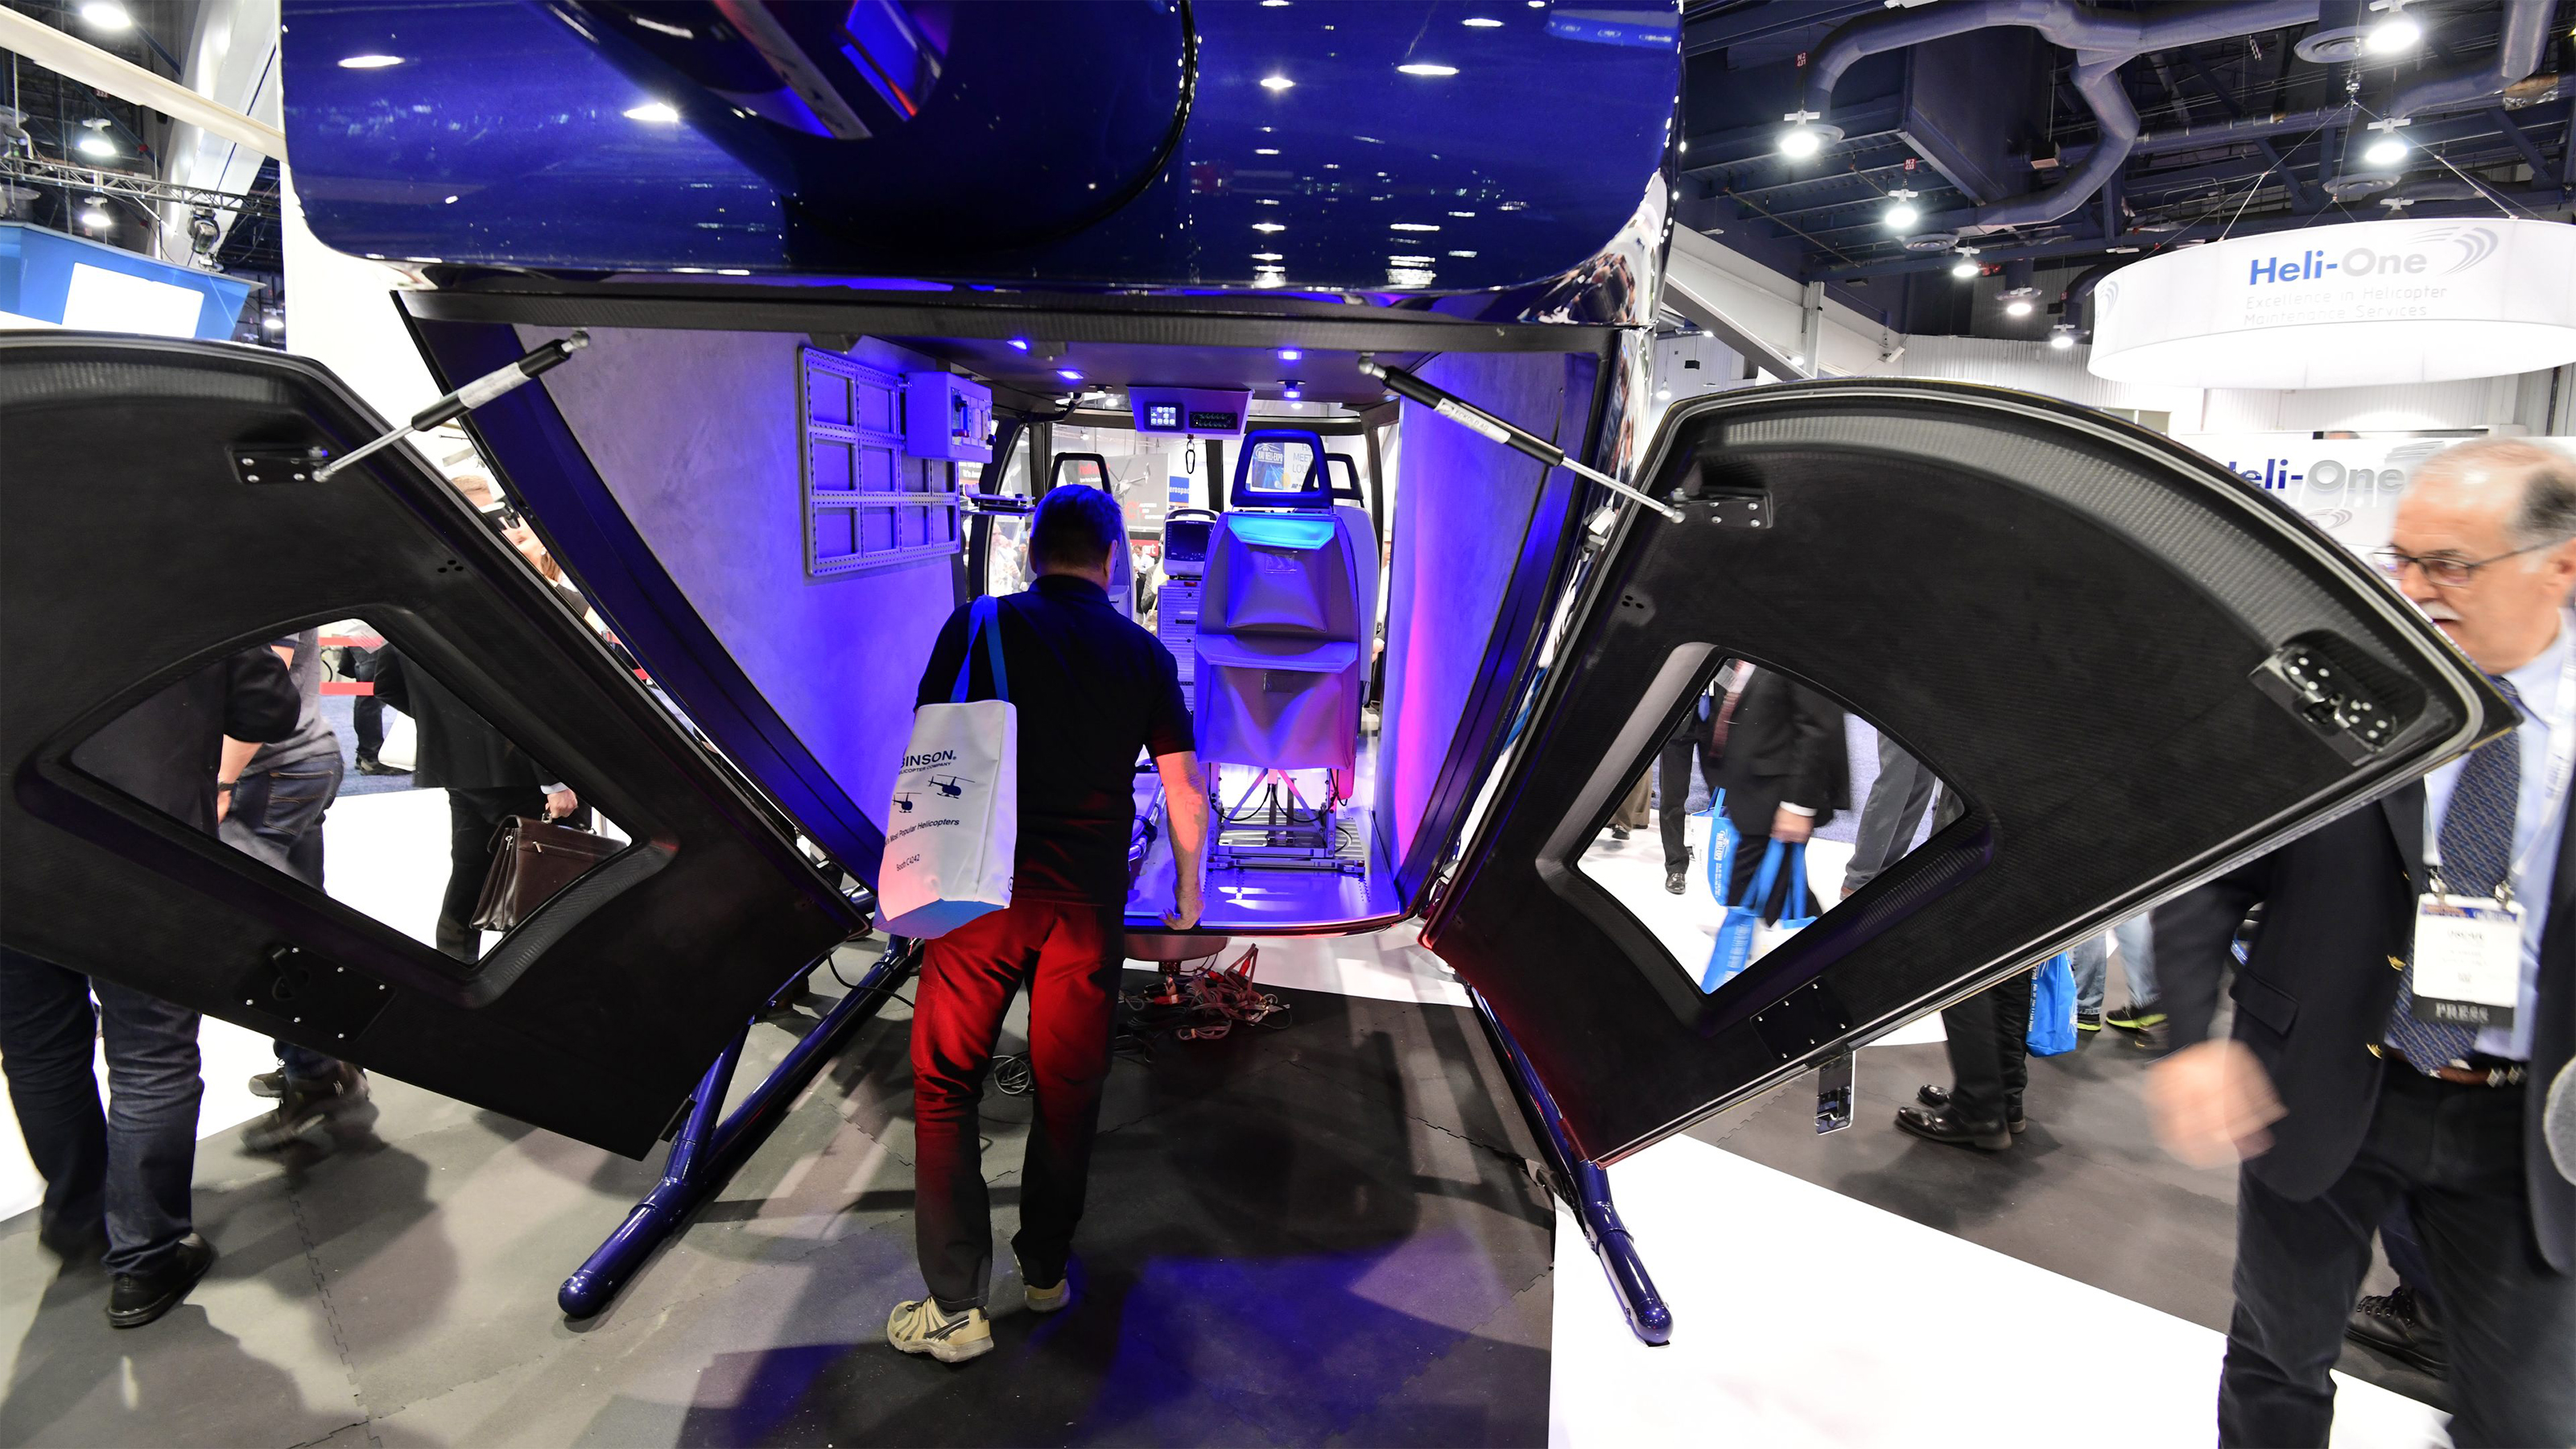 Kopter's new SH09 cabin mockup, on display at HAI Heli-Expo 2018, is fitted with a medivac interior. Air tour operators also have expressed interest in the new model. Photo by Mike Collins.